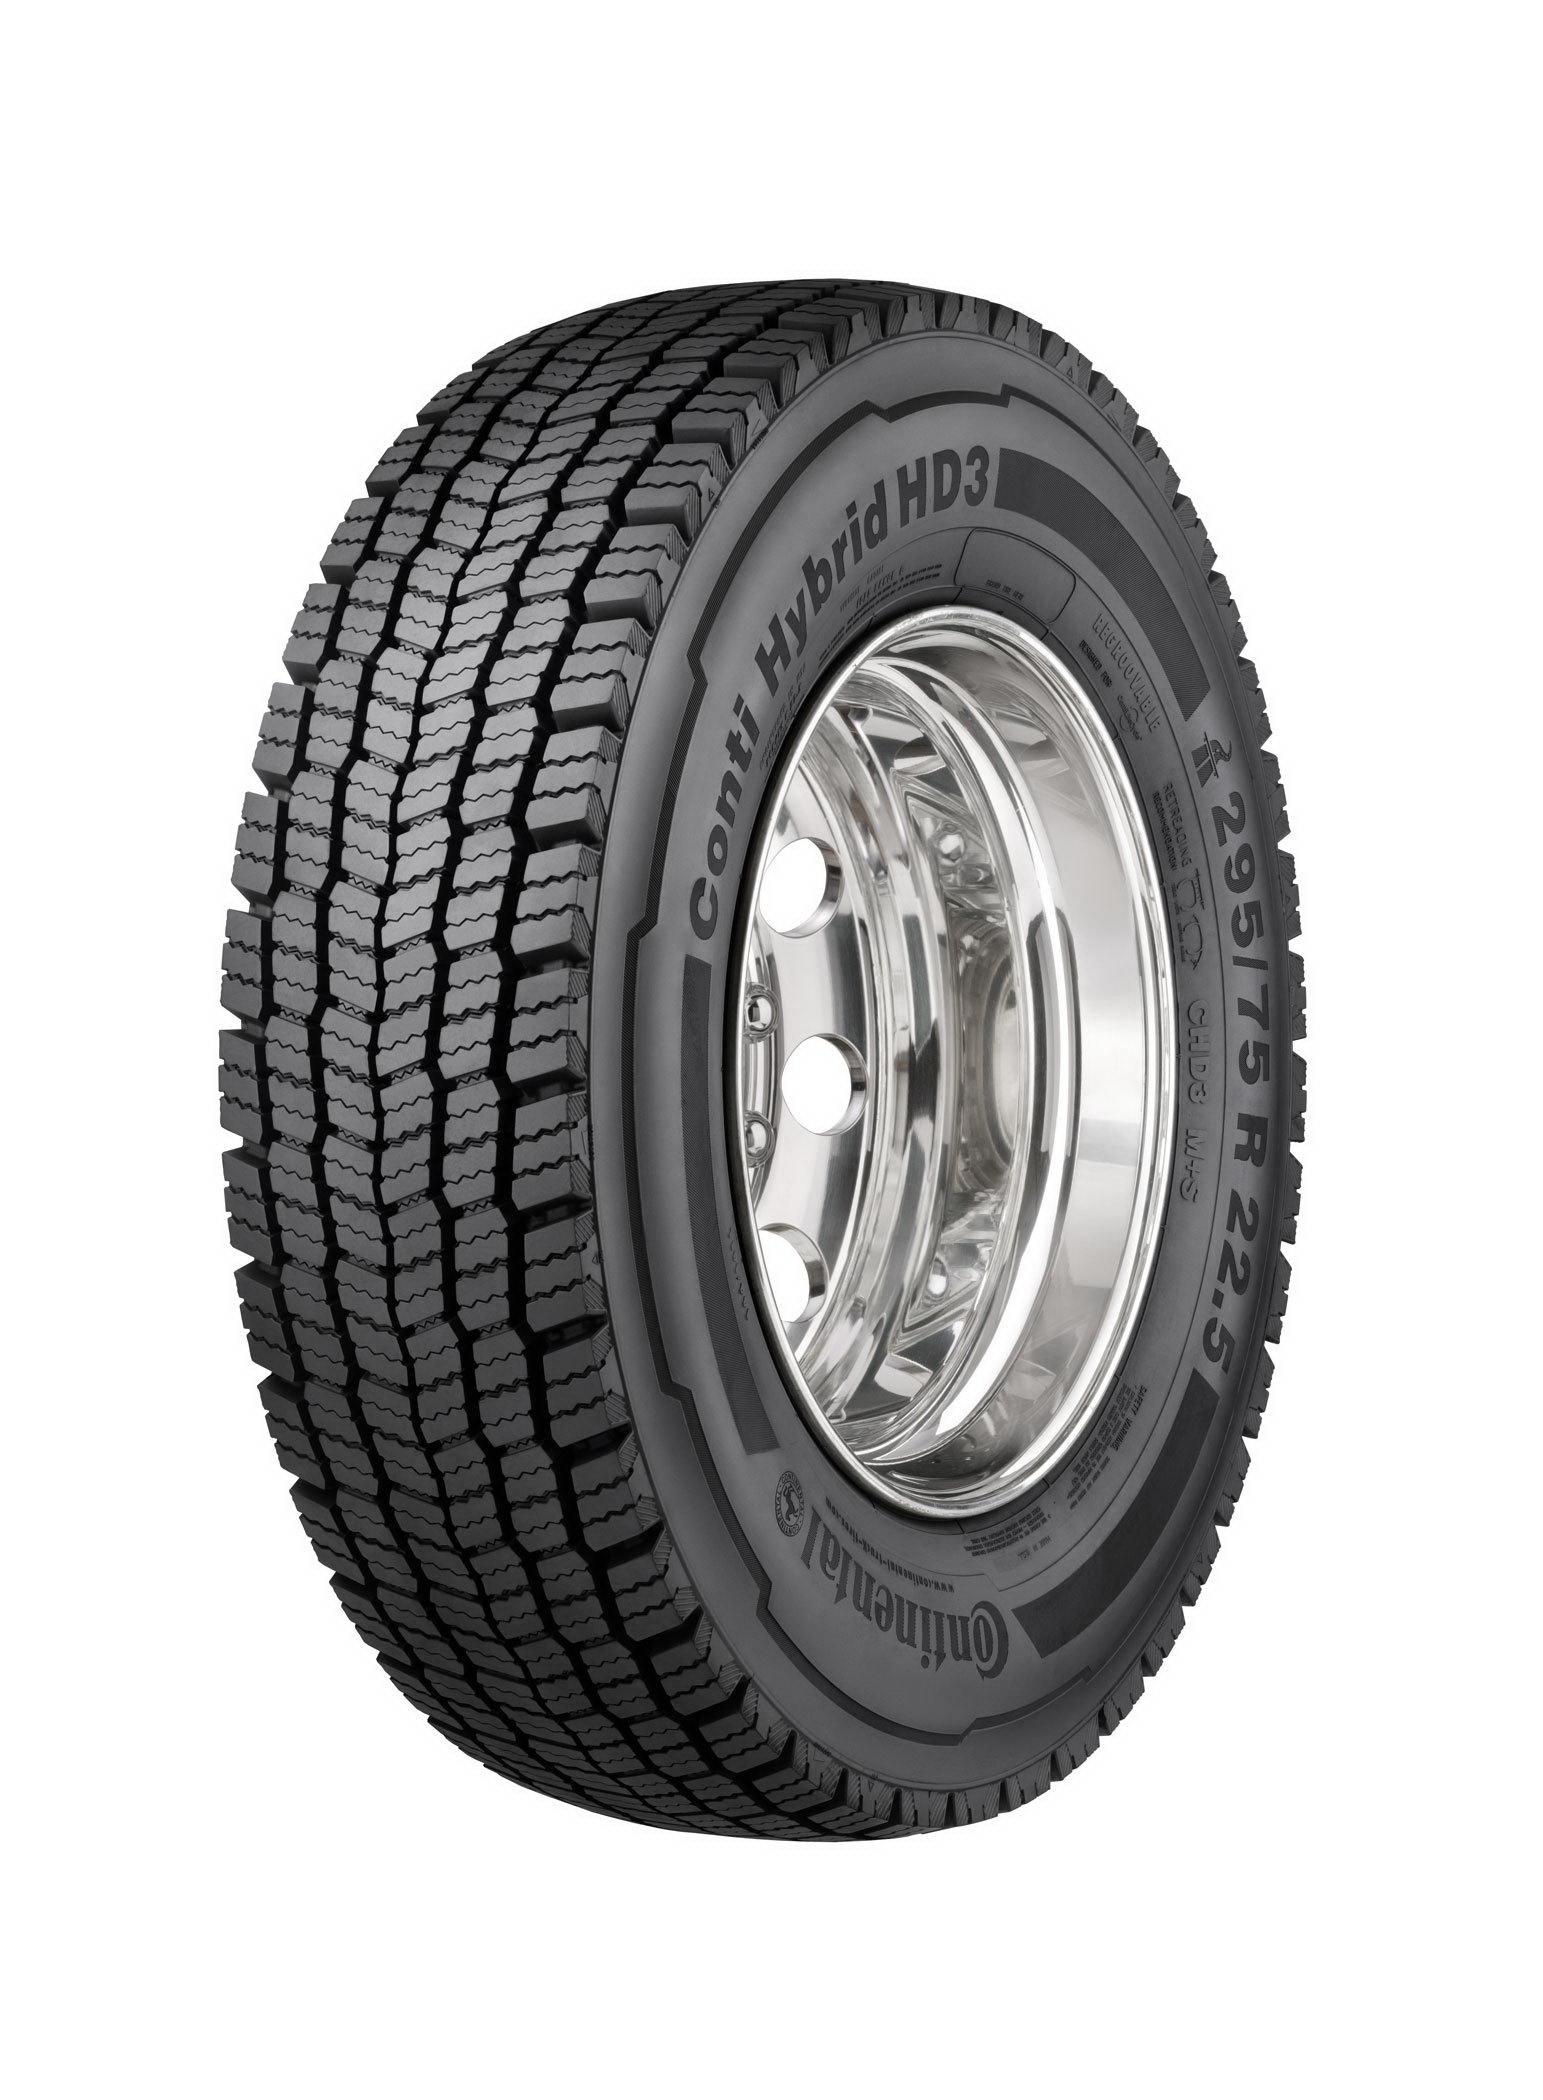 Anvelope tractiune CONTINENTAL CHD3 235/75 R17.5 132/130M